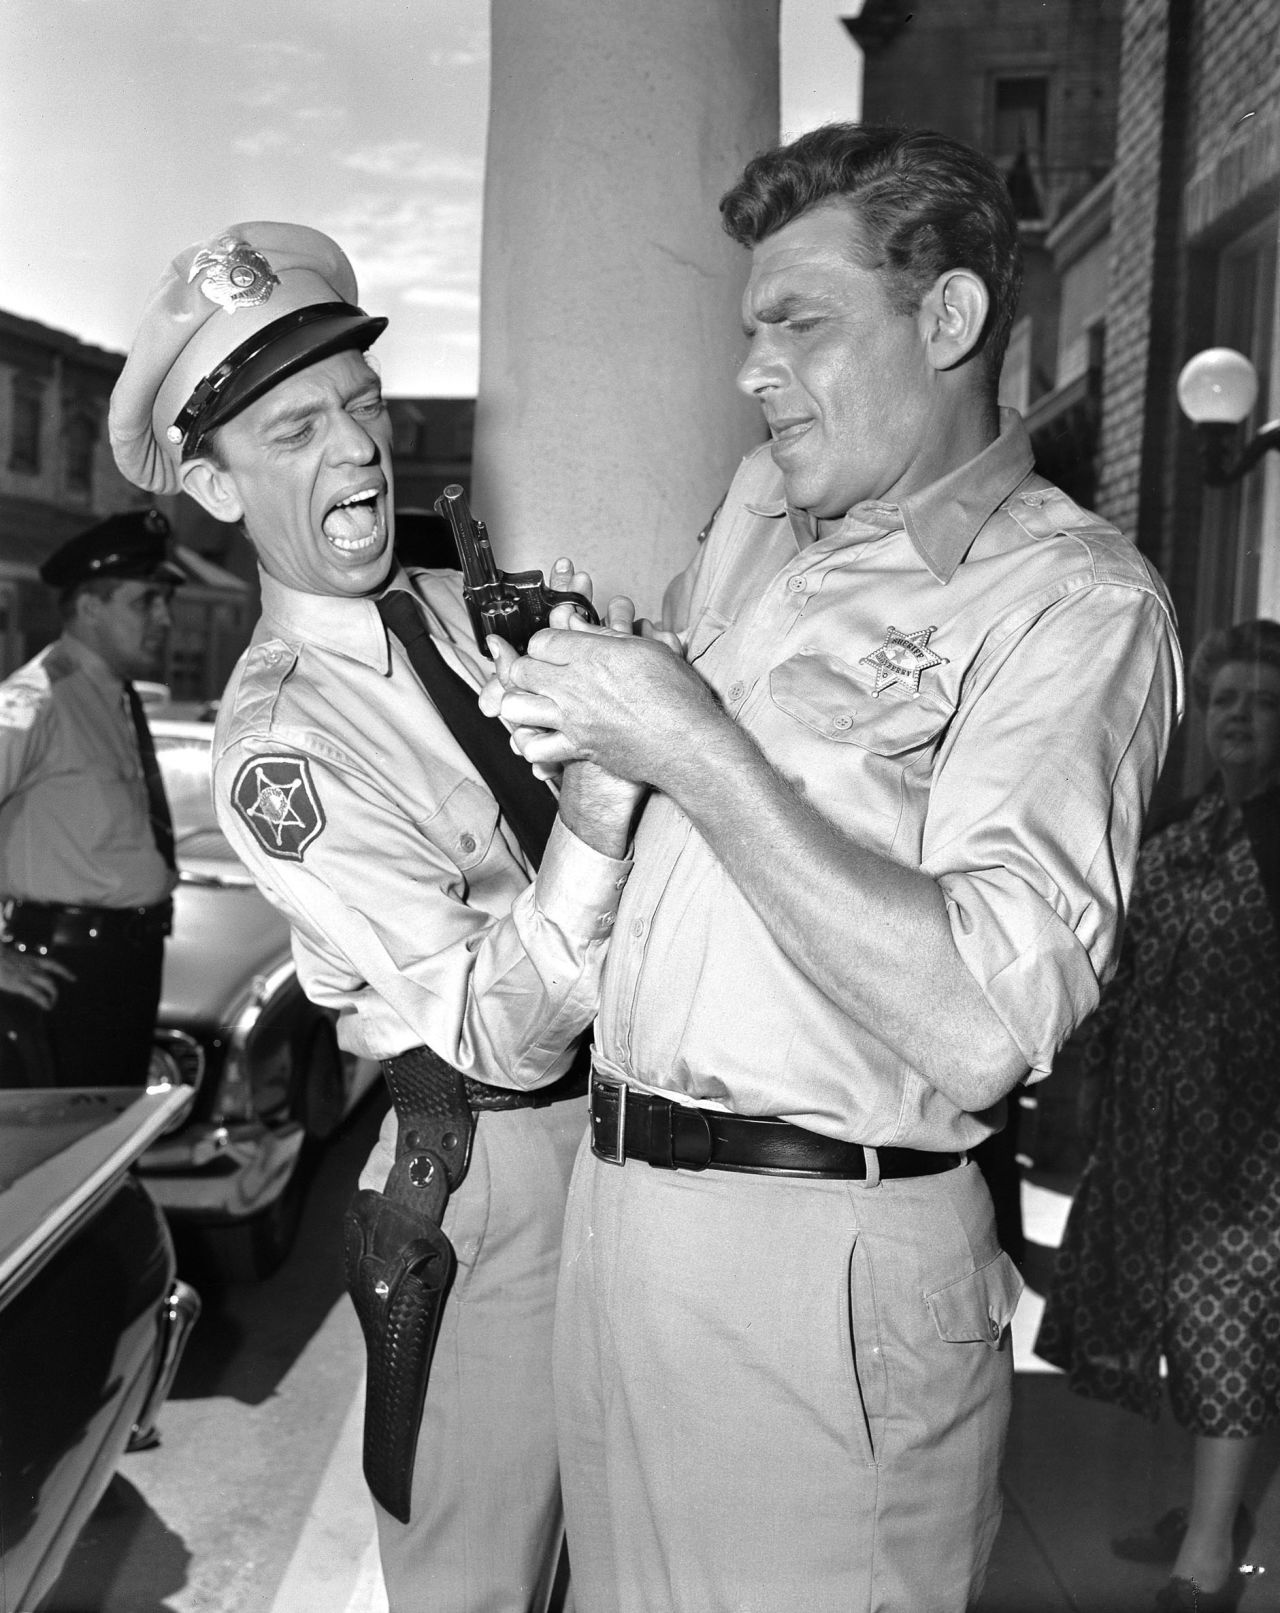 Griffith and Don Knotts were beloved co-stars in the CBS television series "The Andy Griffith Show" from 1960 through 1968.